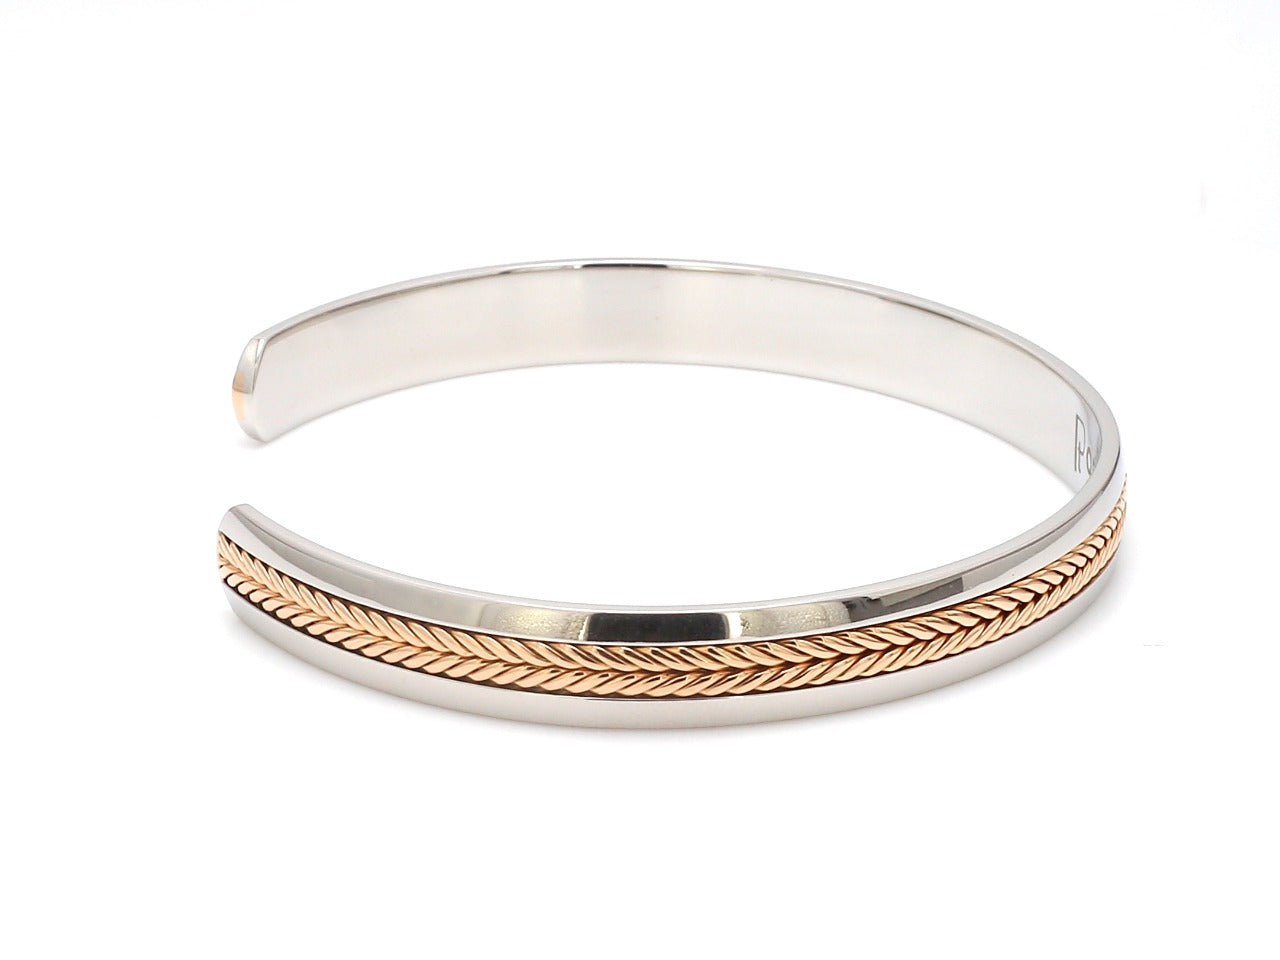 Stainless Steel Viking Cuff Bracelet And Bangles Unisex Gold Love Jewelry  For Men And Women Luxury Fashion Gift For Valentines Day And Christmas From  Hbb18699991658, $6.38 | DHgate.Com